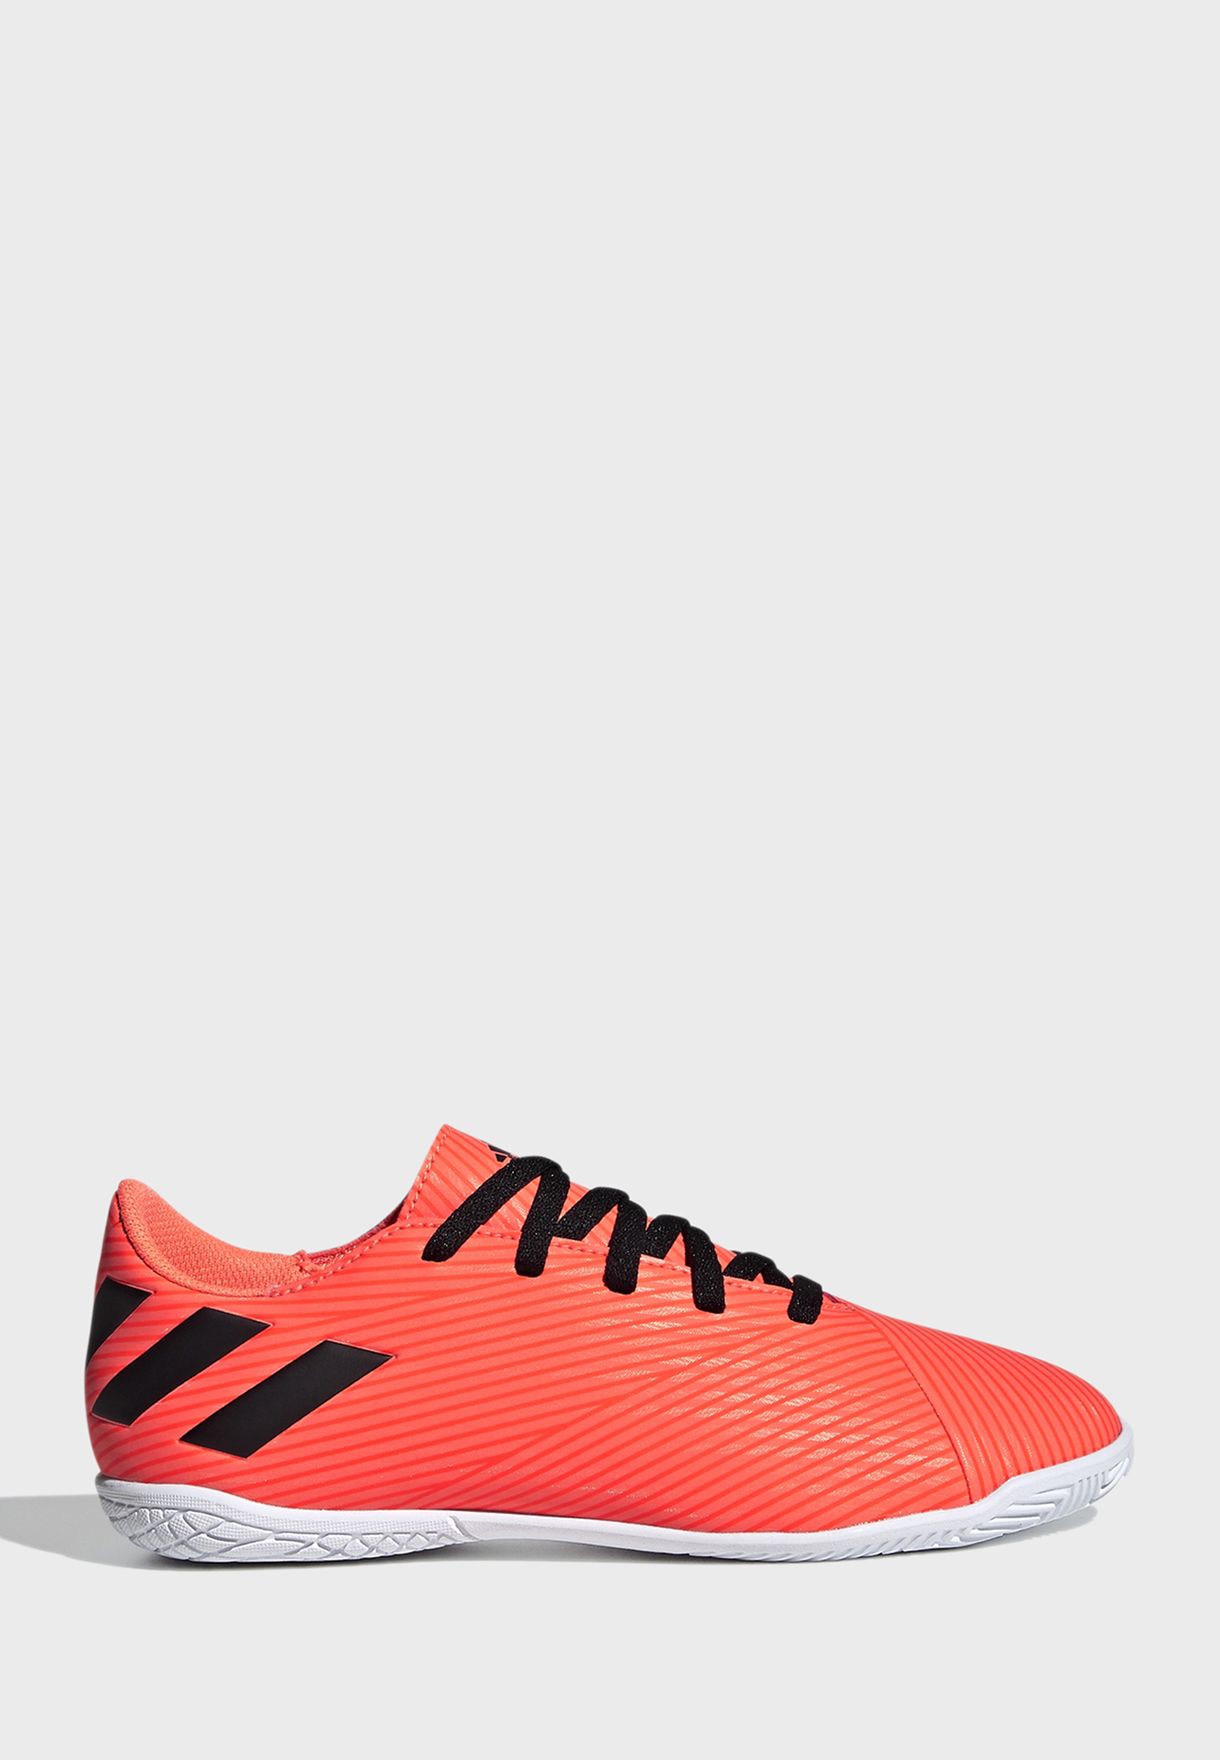 soccer indoor shoes cheap